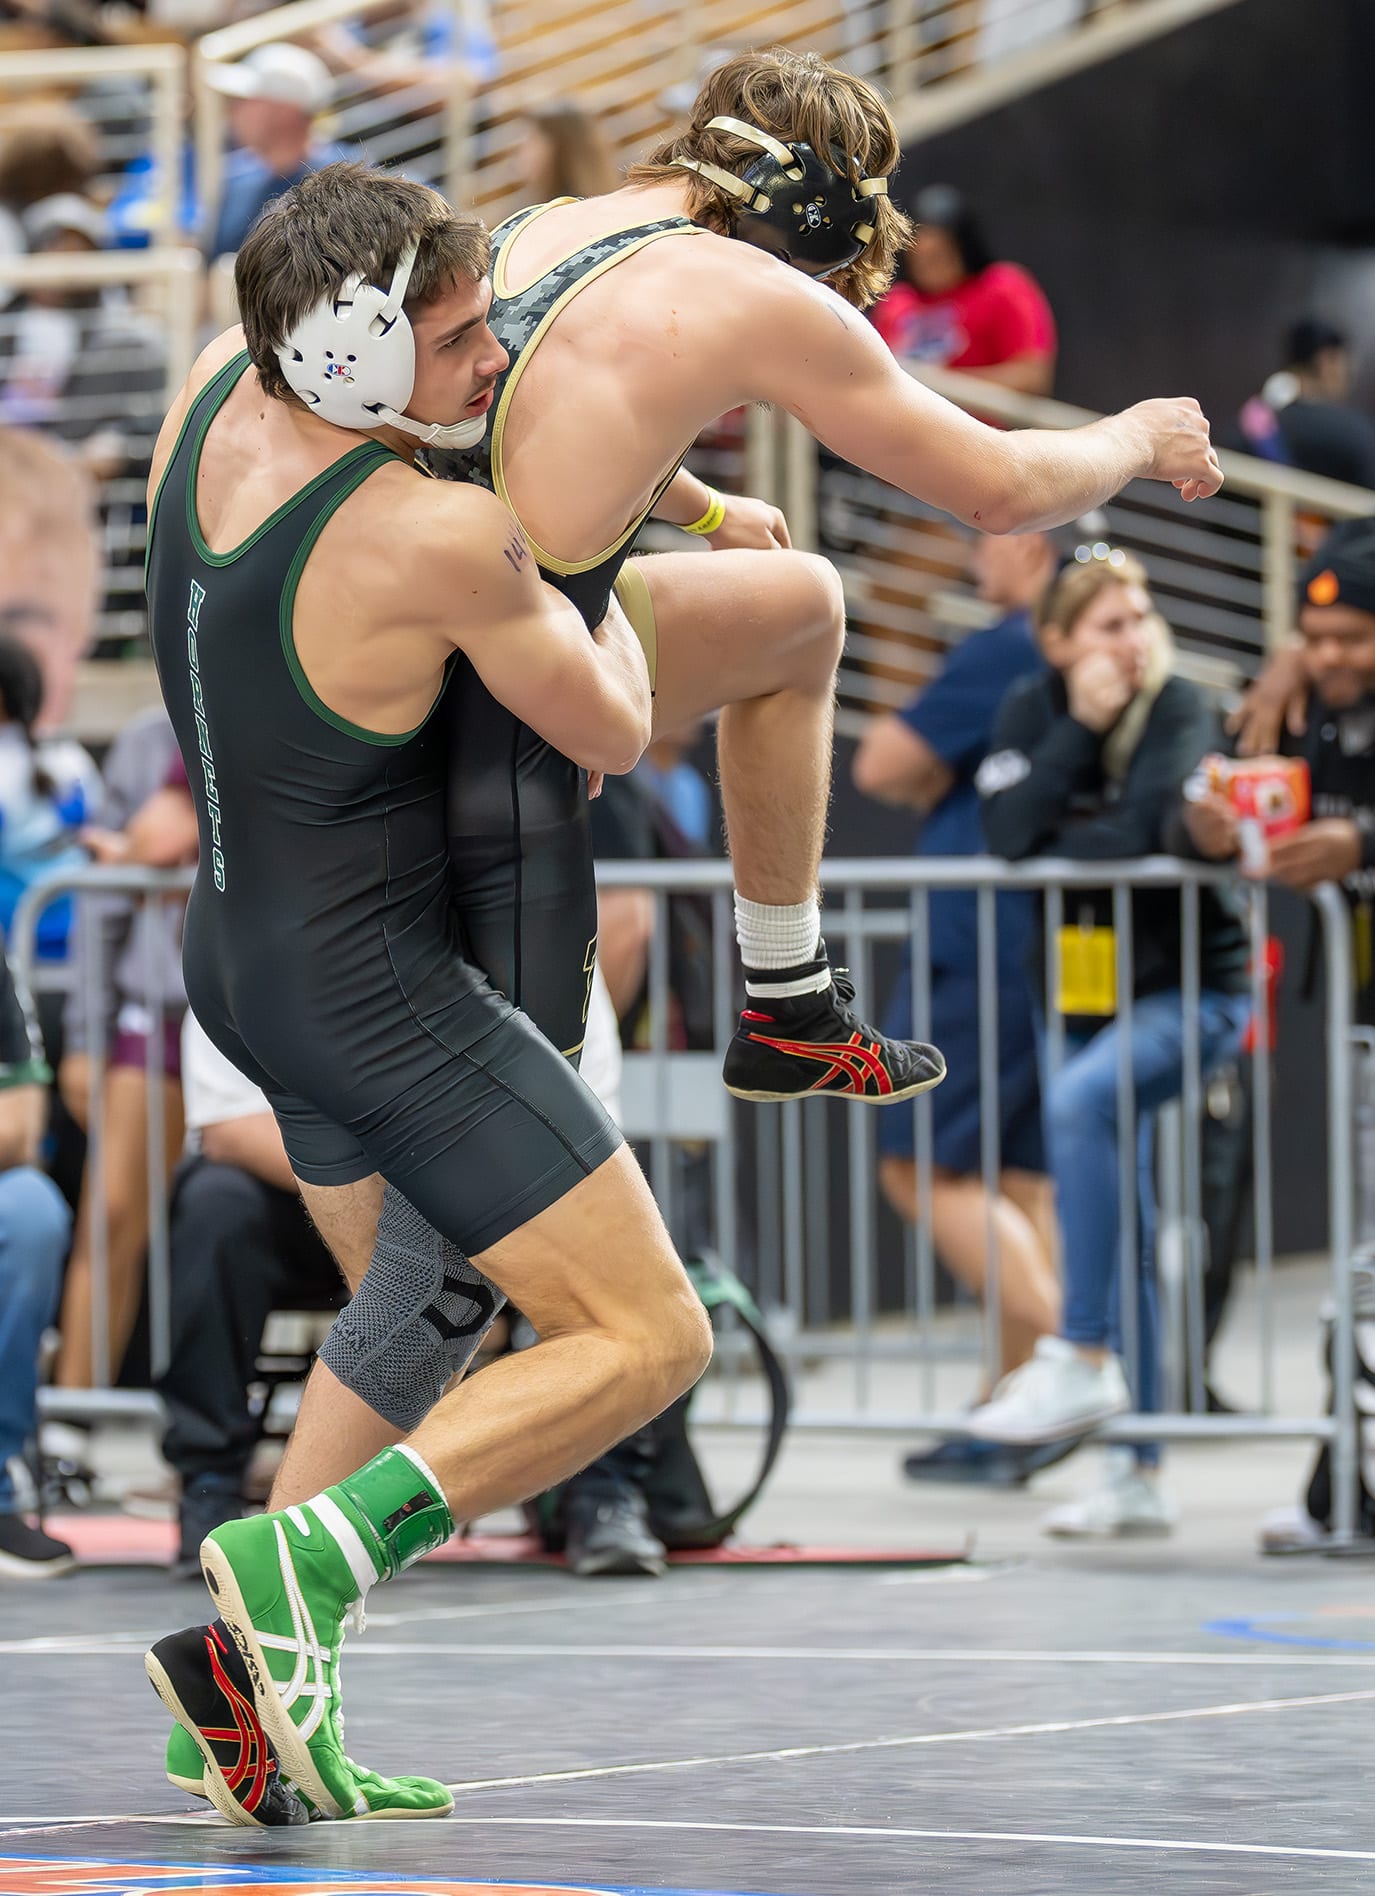 Weeki Wachee High 144 pound Ricky Bowermaster needed defeated Talon Maple from Zephyr Hills Christian by Fall at 3:41 at the 2024 FHSAA State Championship in Kissimmee. [Photo by Joe DiCristofalo]